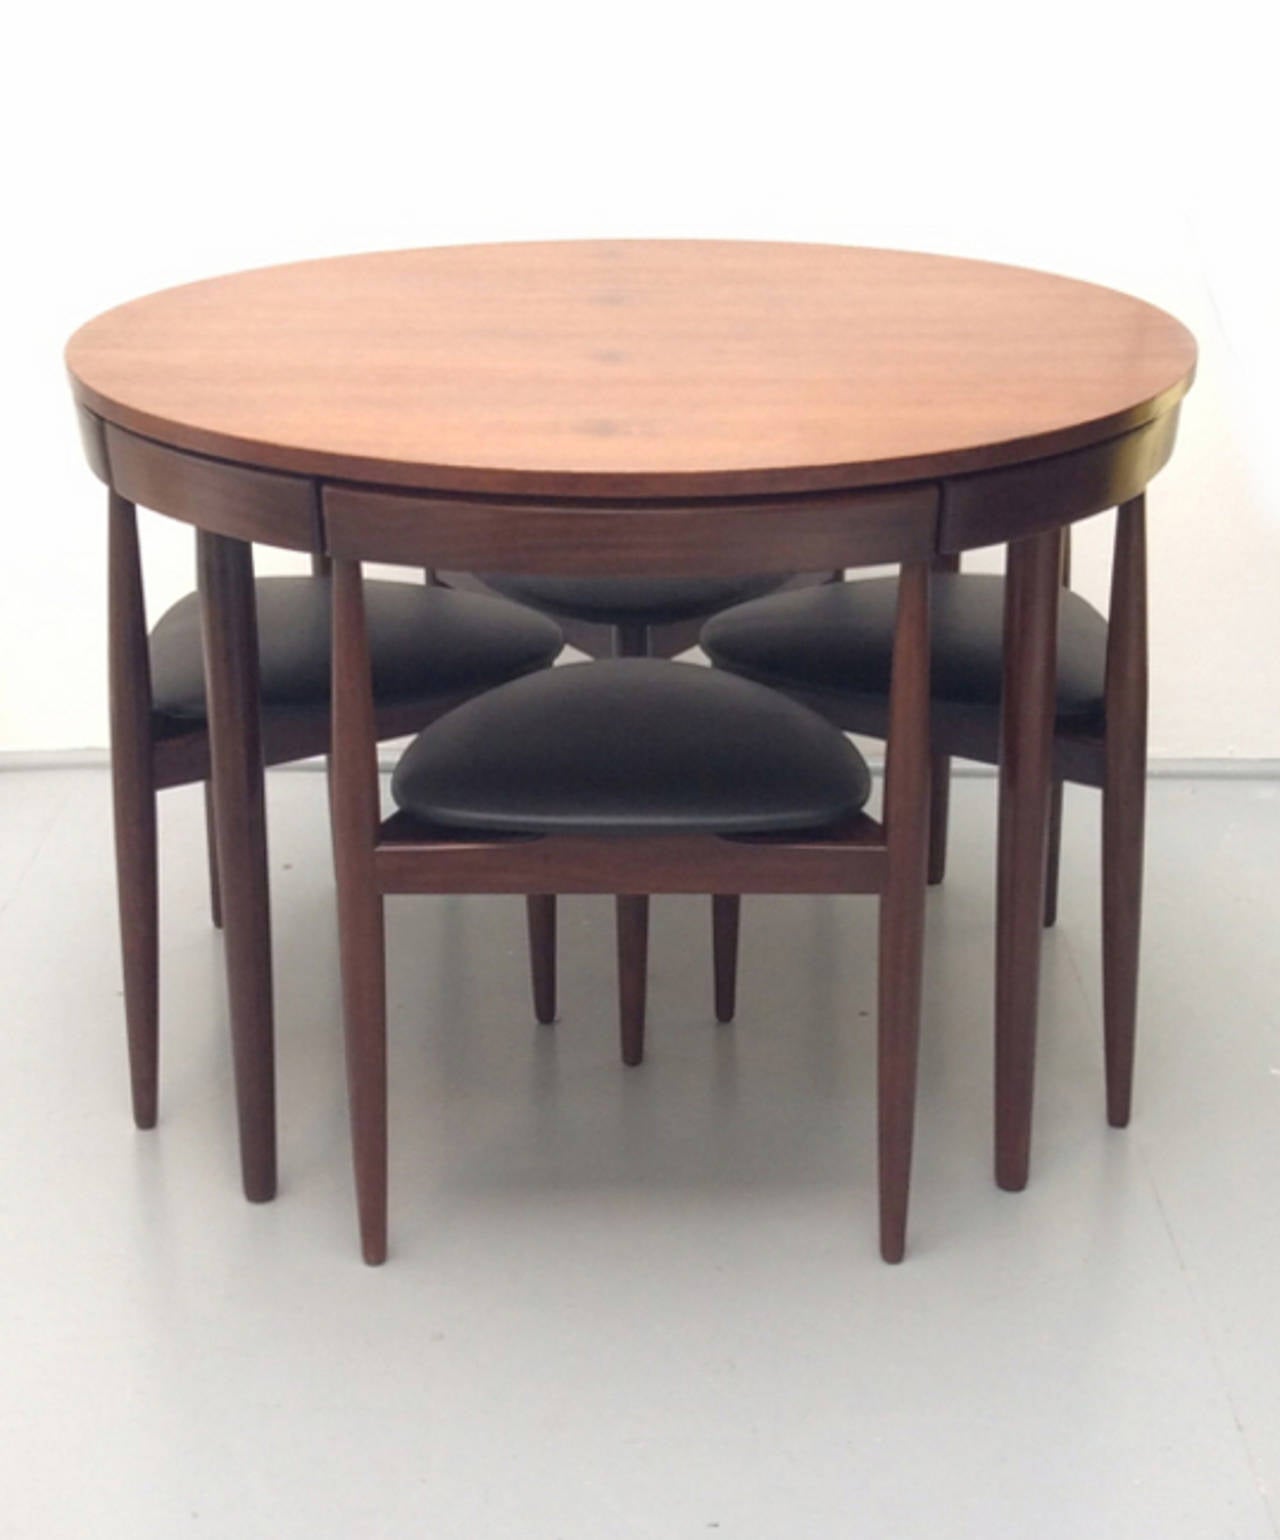 The teak and afromosia suite comprises four three-legged chairs which fit neatly into position in the apron of the table top. The chairs have been newly re-upholstered in soft black leather, and pieces are labelled.  Table legs unscrew for